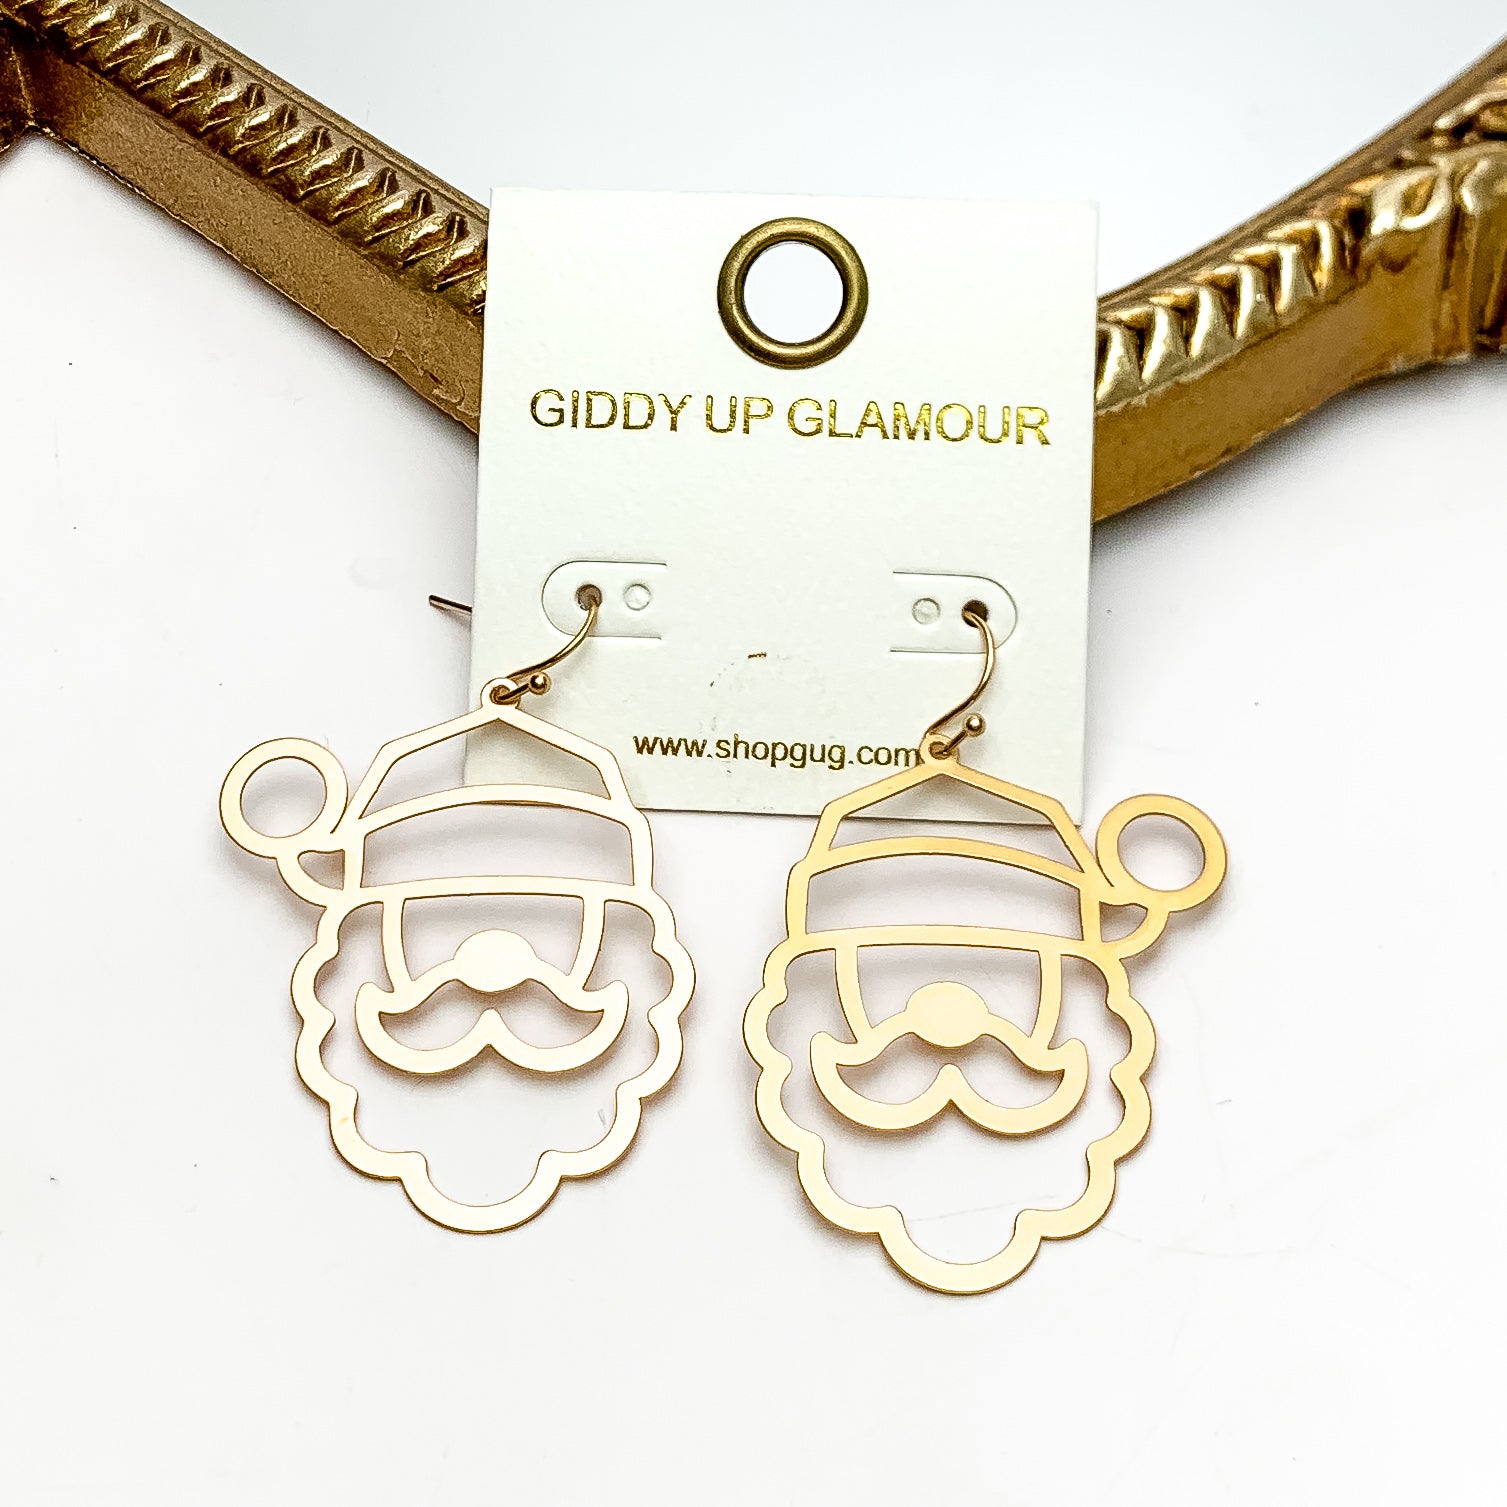 Santa Outline Earrings in Gold Tone. These earrings are pictured on a white background with a gold frame around.